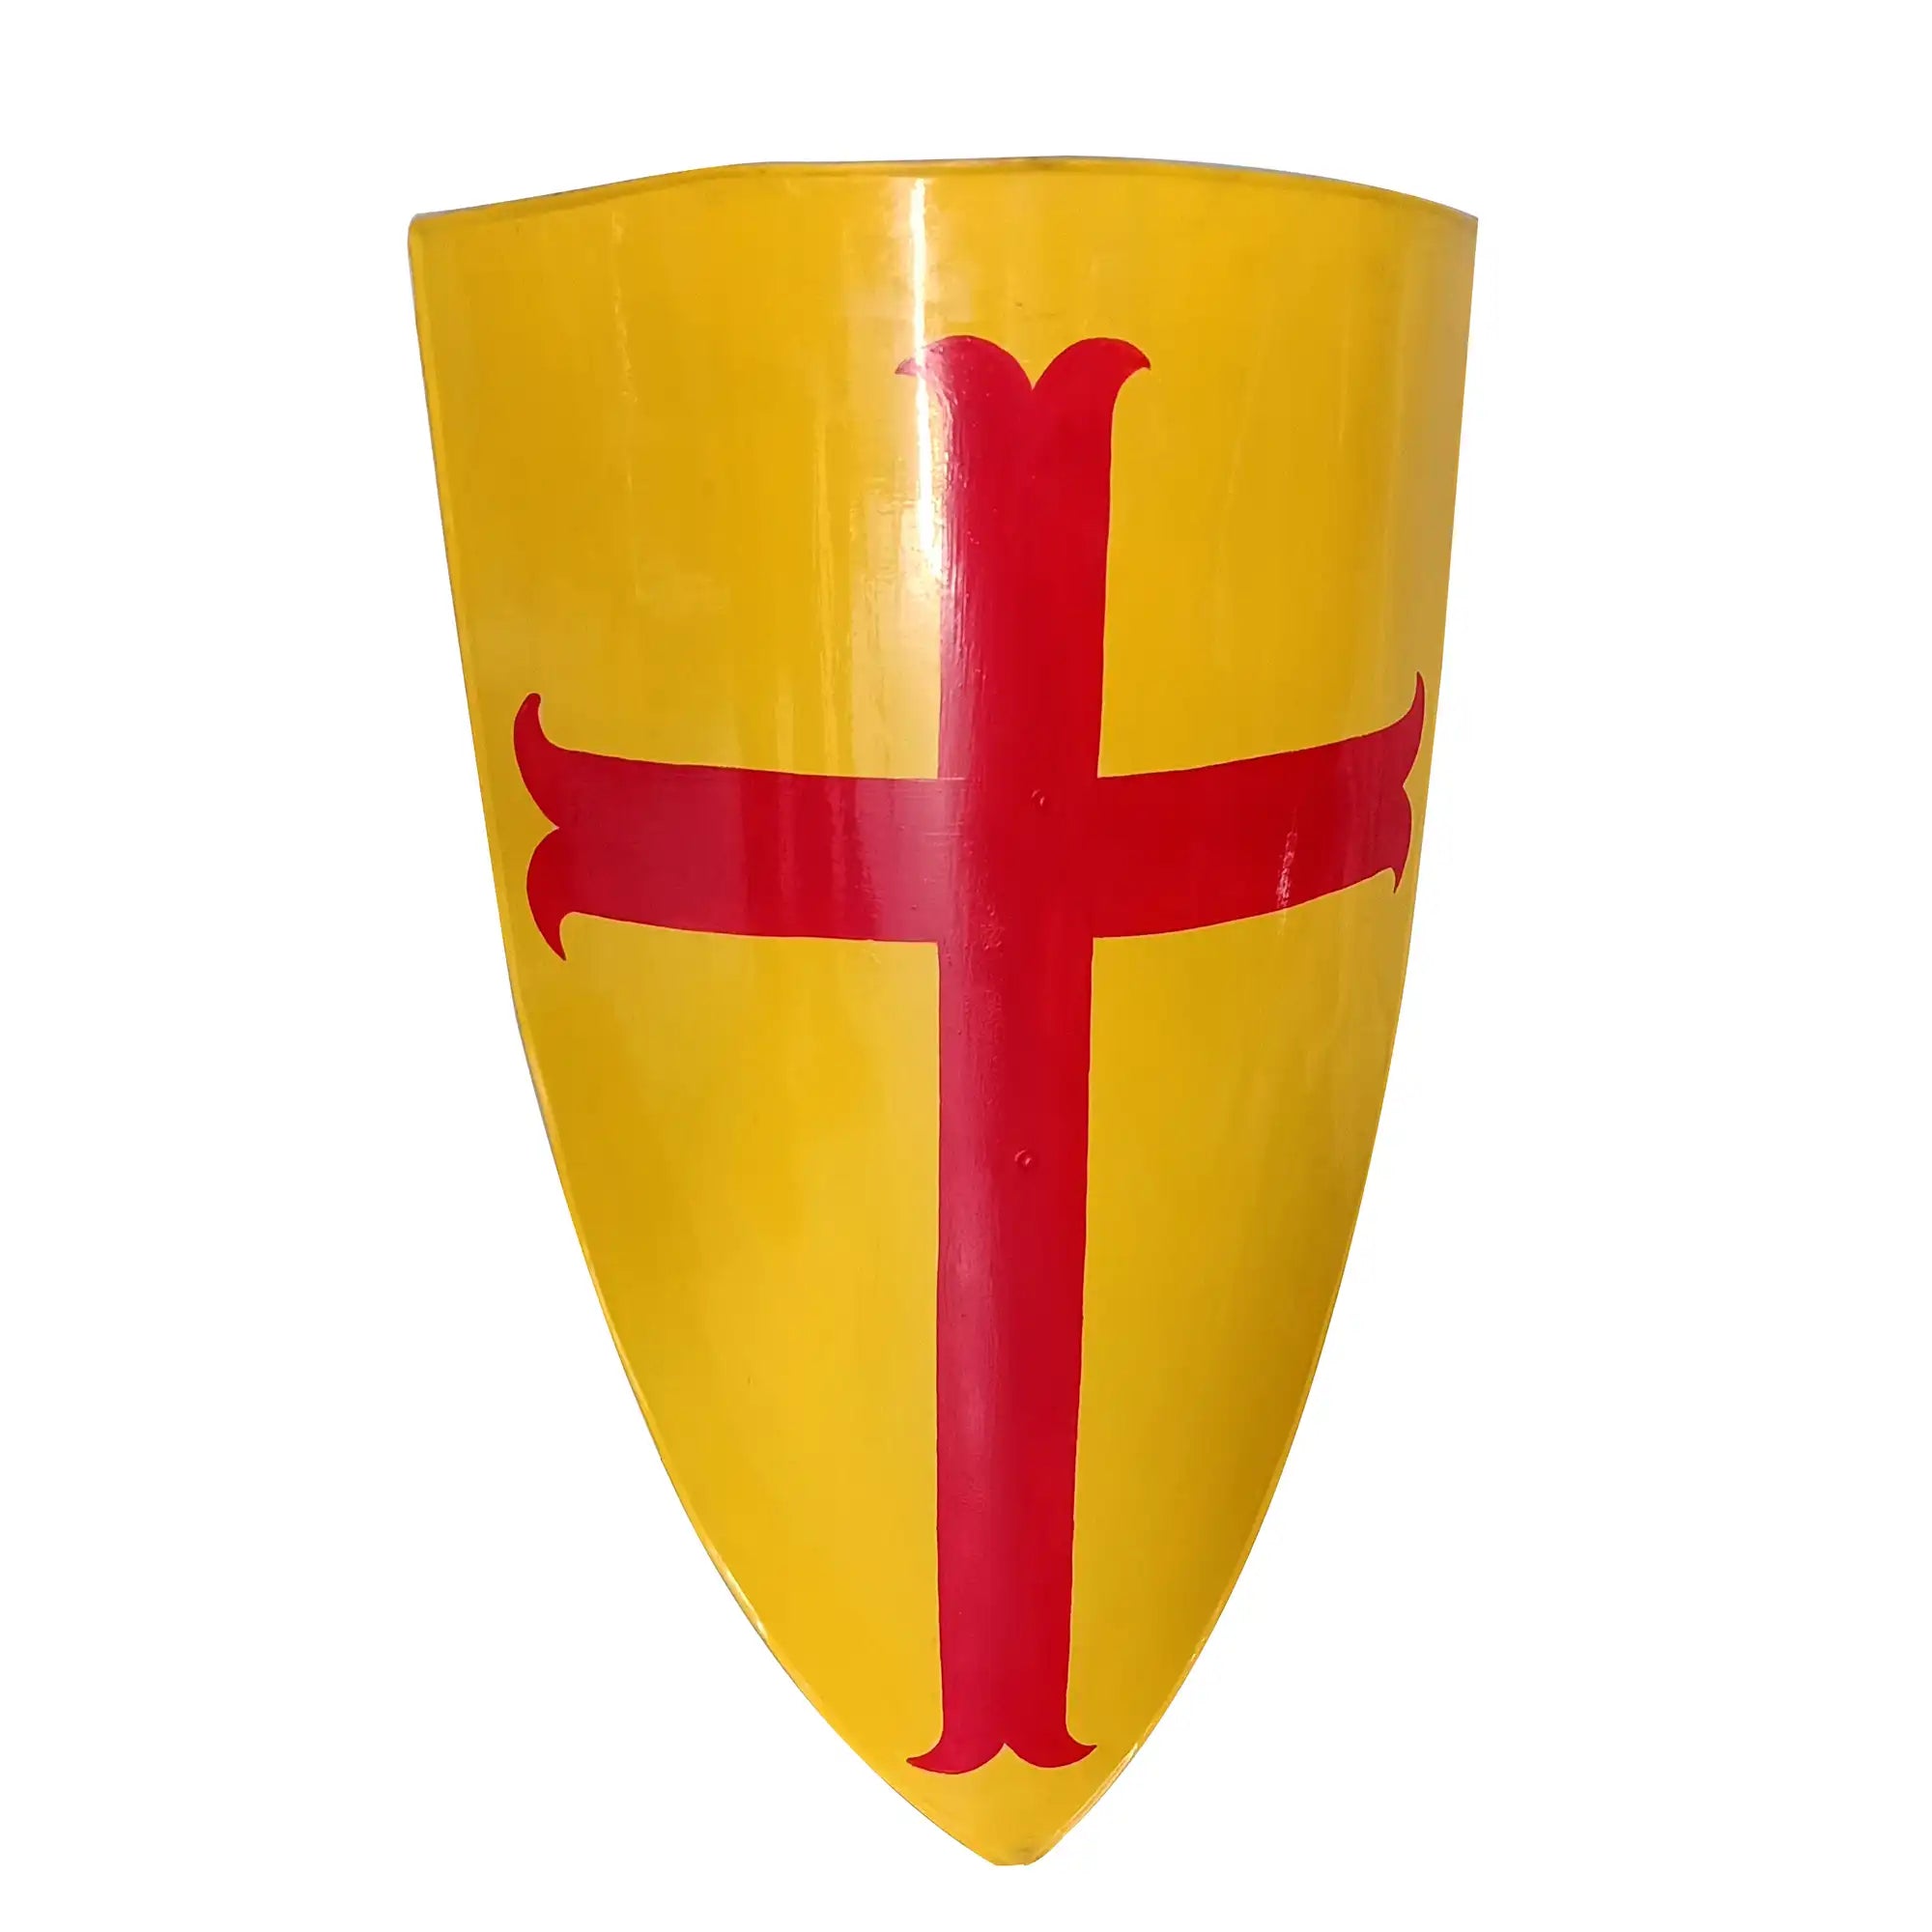 Medieval 13th century Red Cross Knights Crusader Heater Combat Yellow Ready For Combat Shield